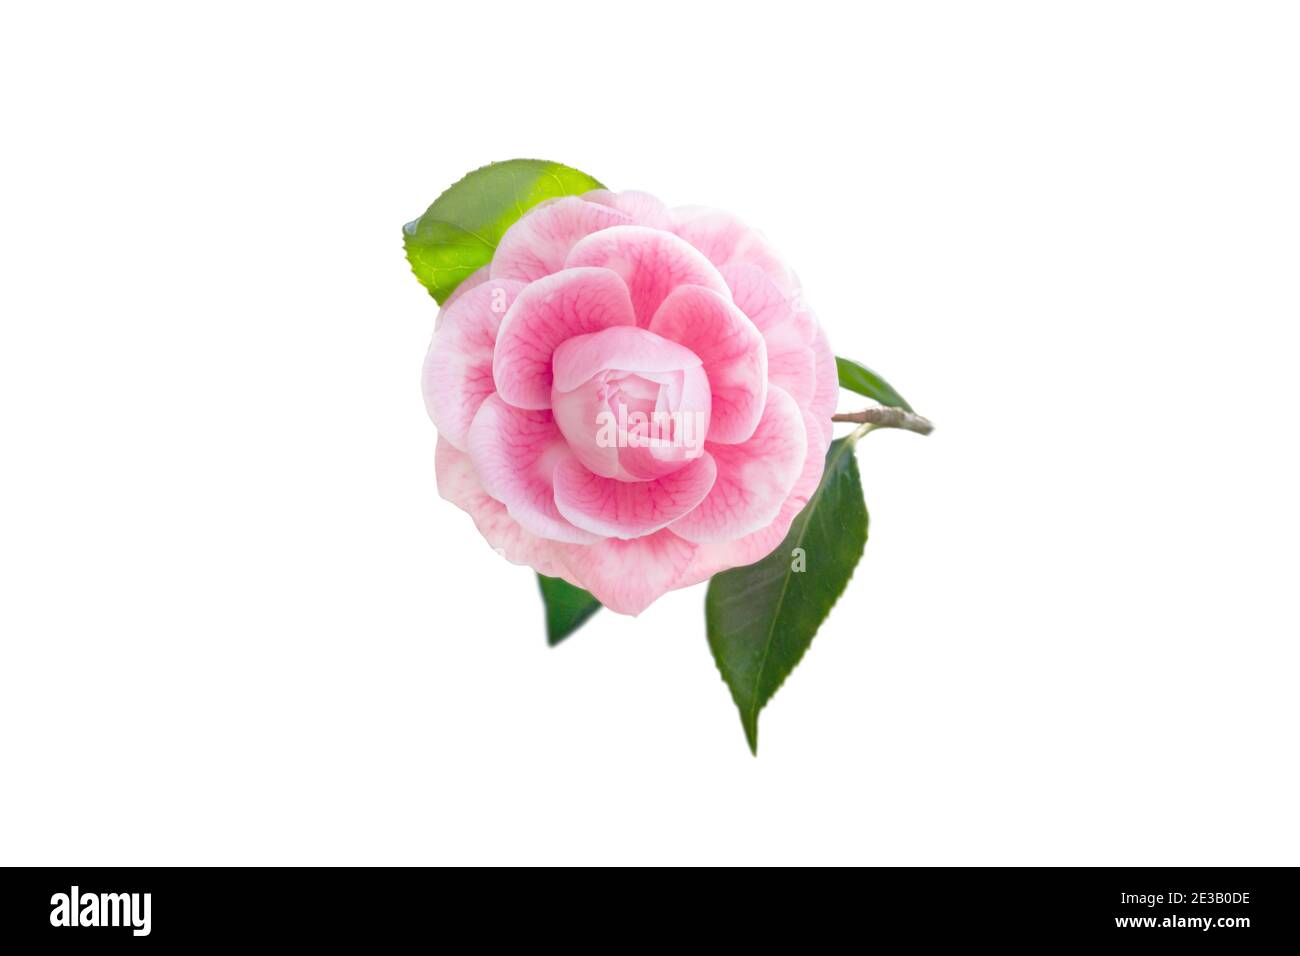 Pale pink camellia japonica rose form flower and leaves isolated on white. Japanese tsubaki. Toned image. Stock Photo